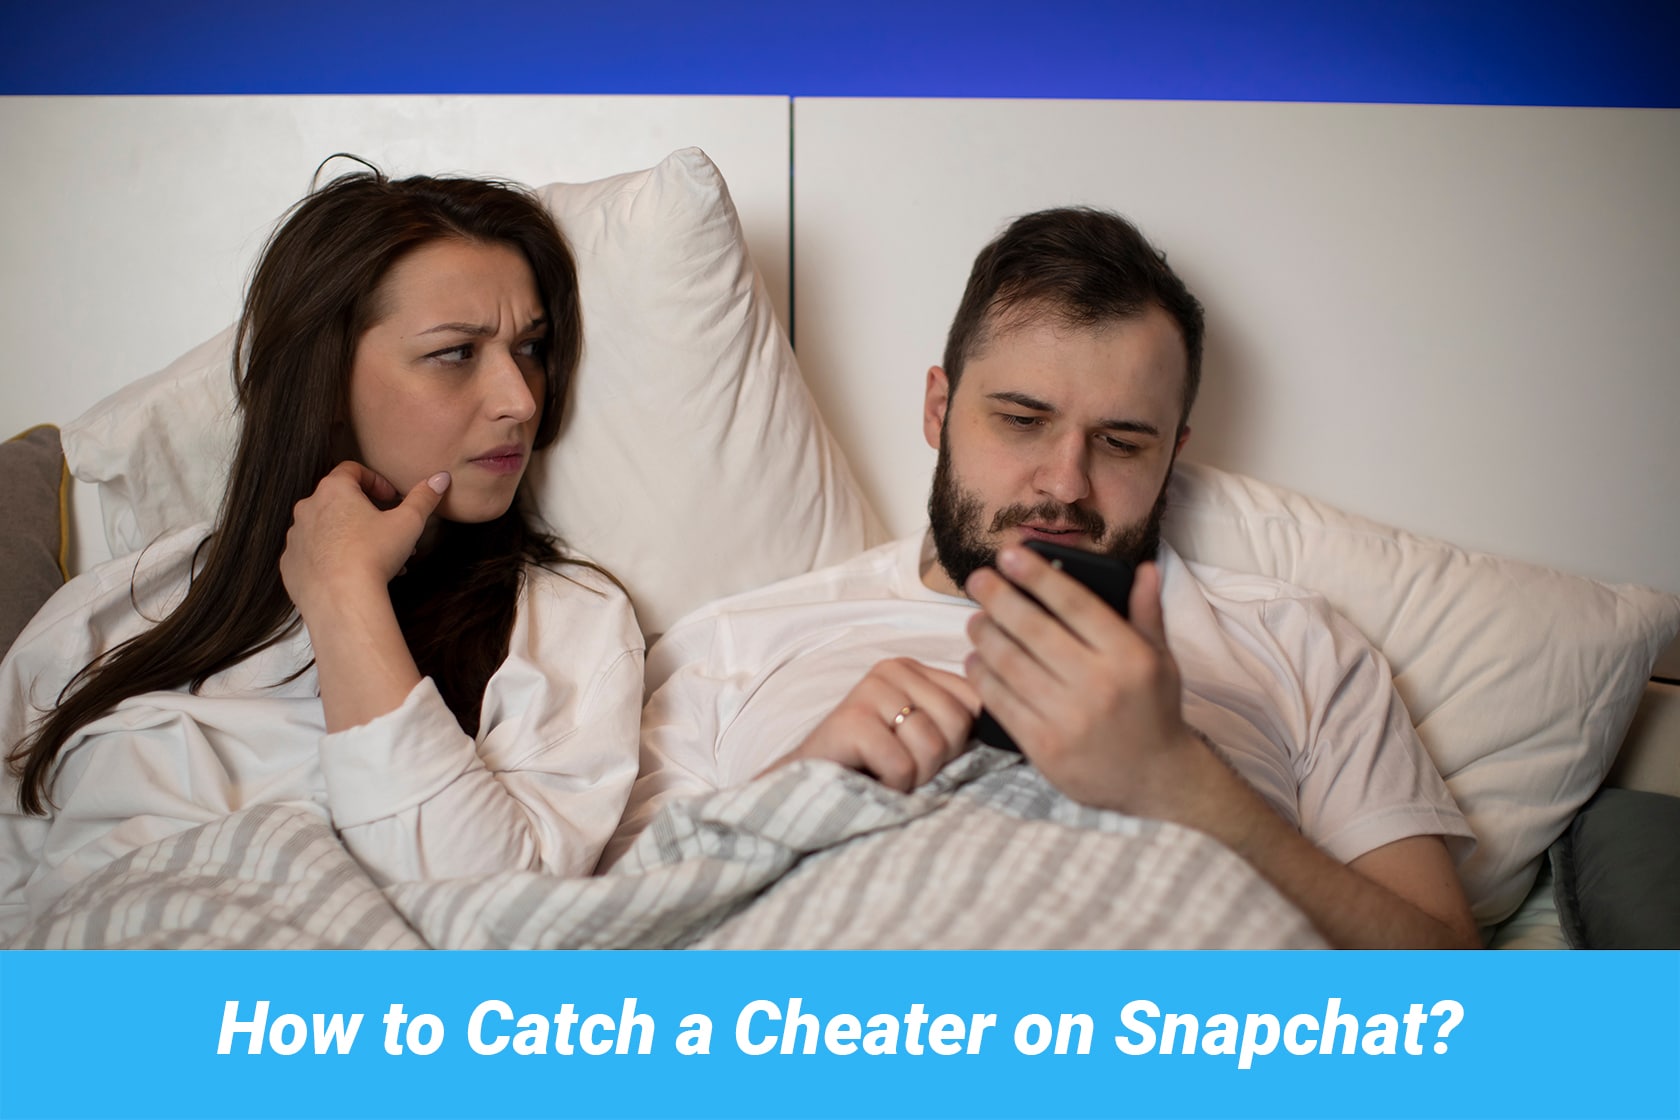 man ignores his girlfriend because he cheats on Snapchat